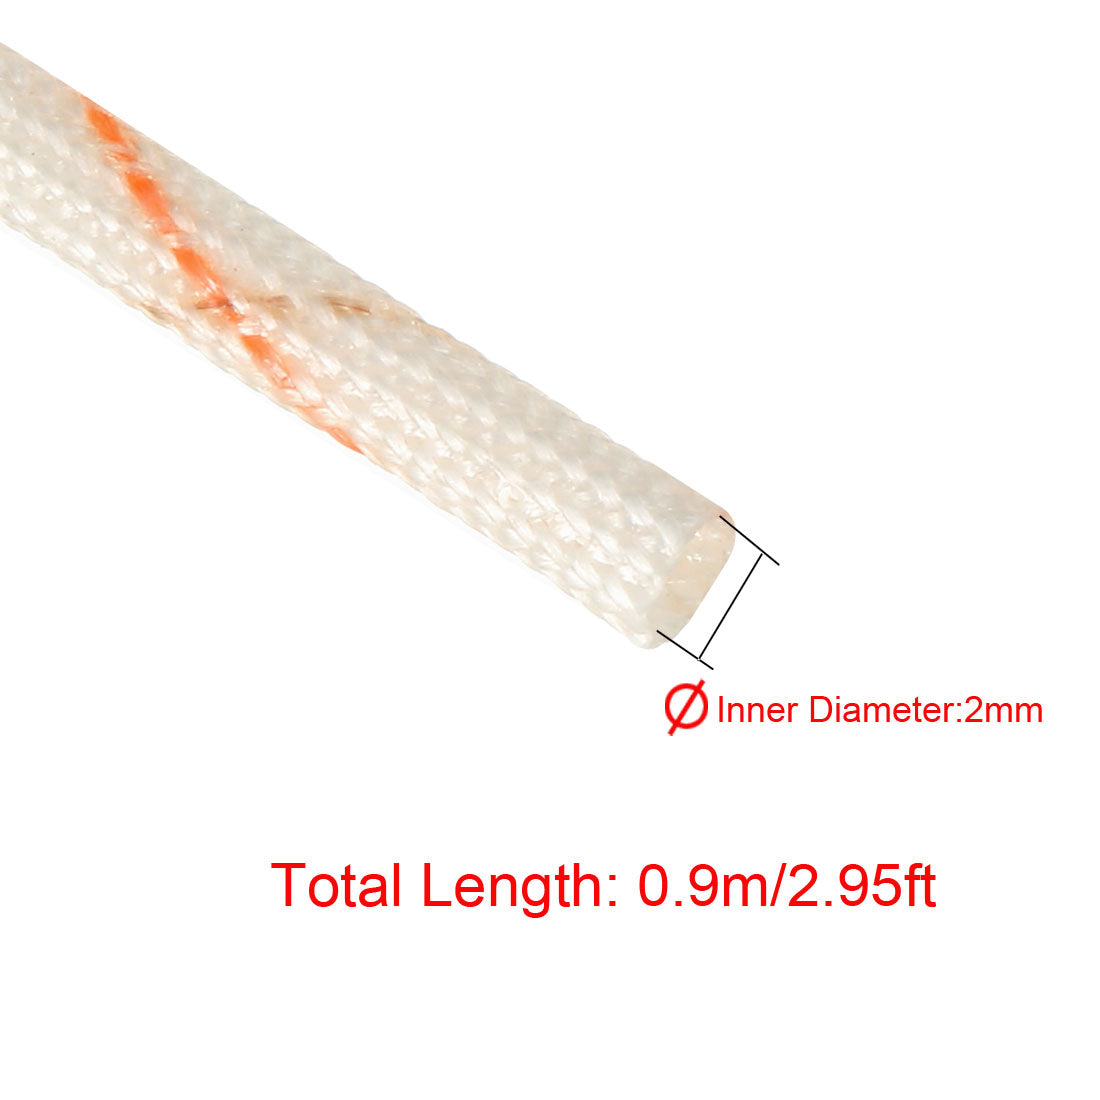 uxcell Uxcell Fiberglass Sleeve 2mm I.D. PVC Insulation Tubing 1500V Tube Adjustable Sleeving Pipe 125 Degree Centigrade Cable Wrap Wire 900mm 2.95ft 10Pcs